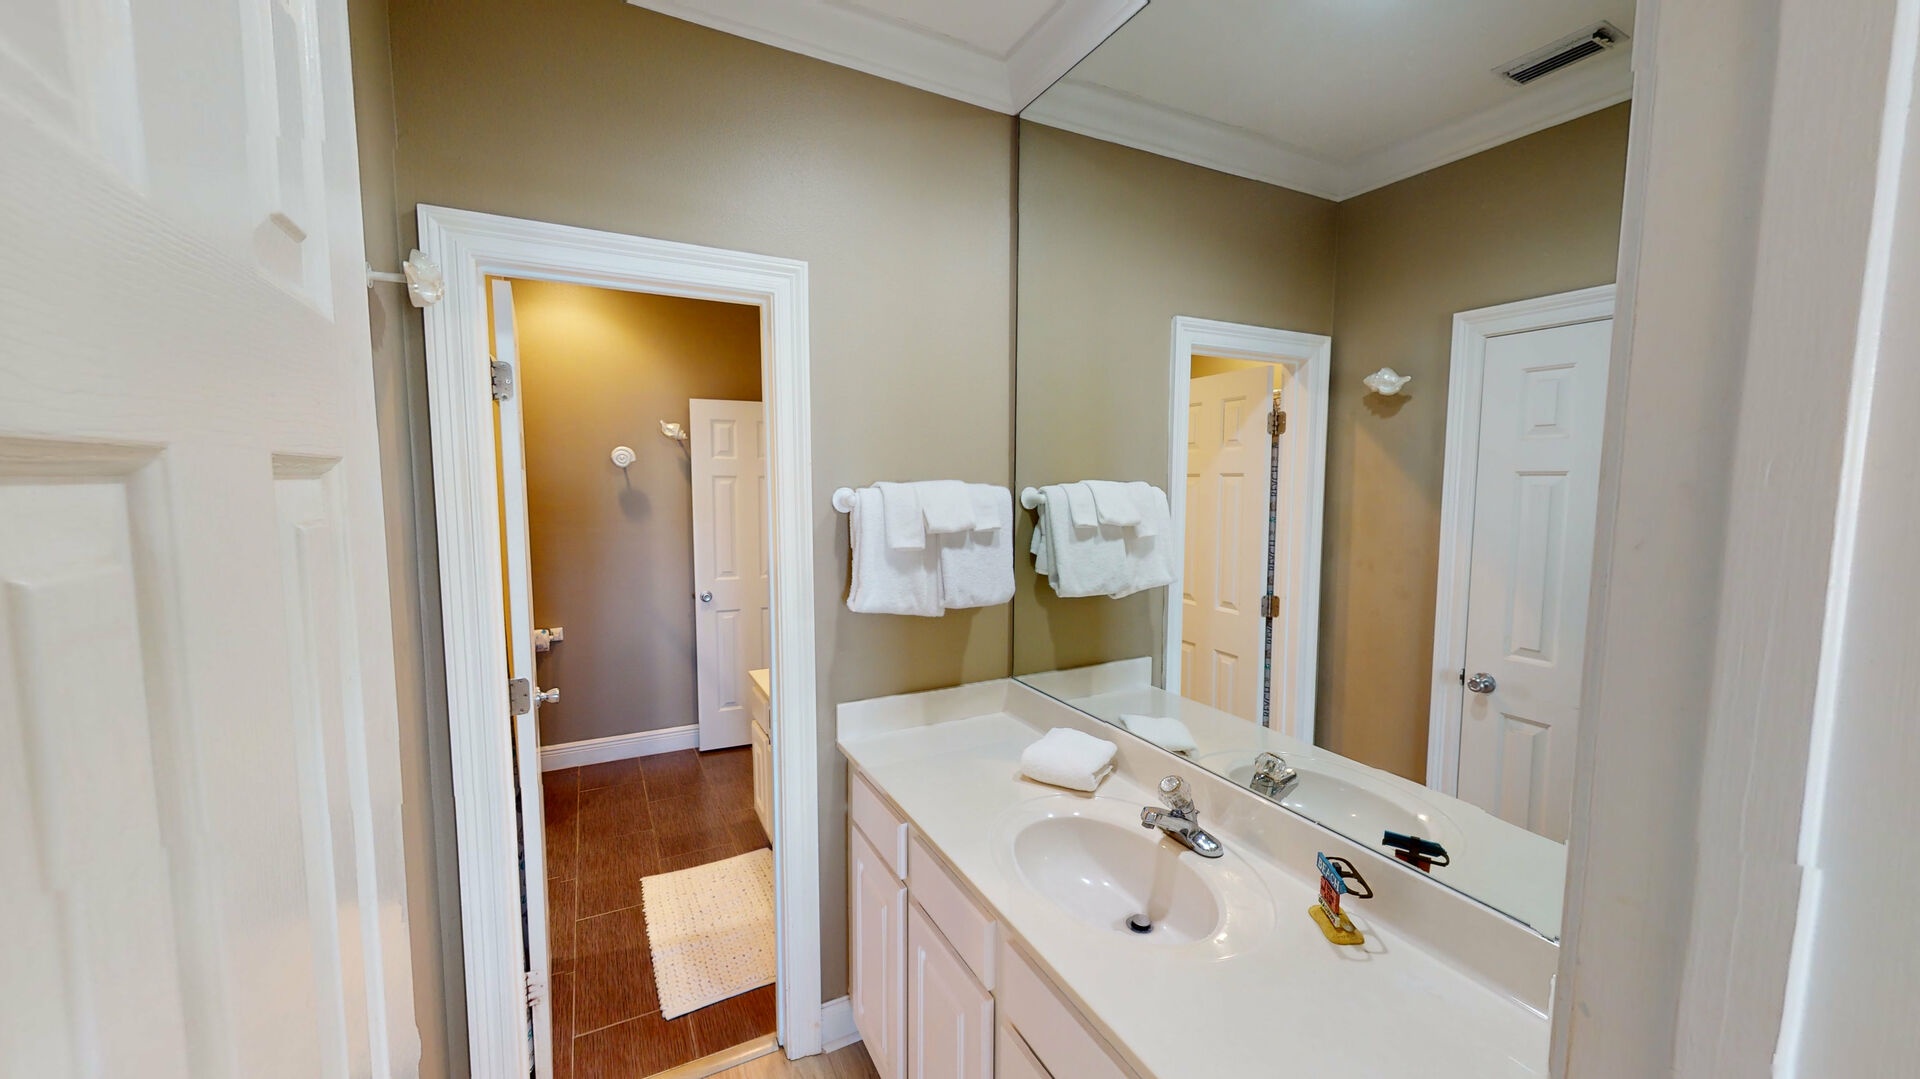 Private vanity for Bedroom 5, the tub/shower combo and toilet are shared